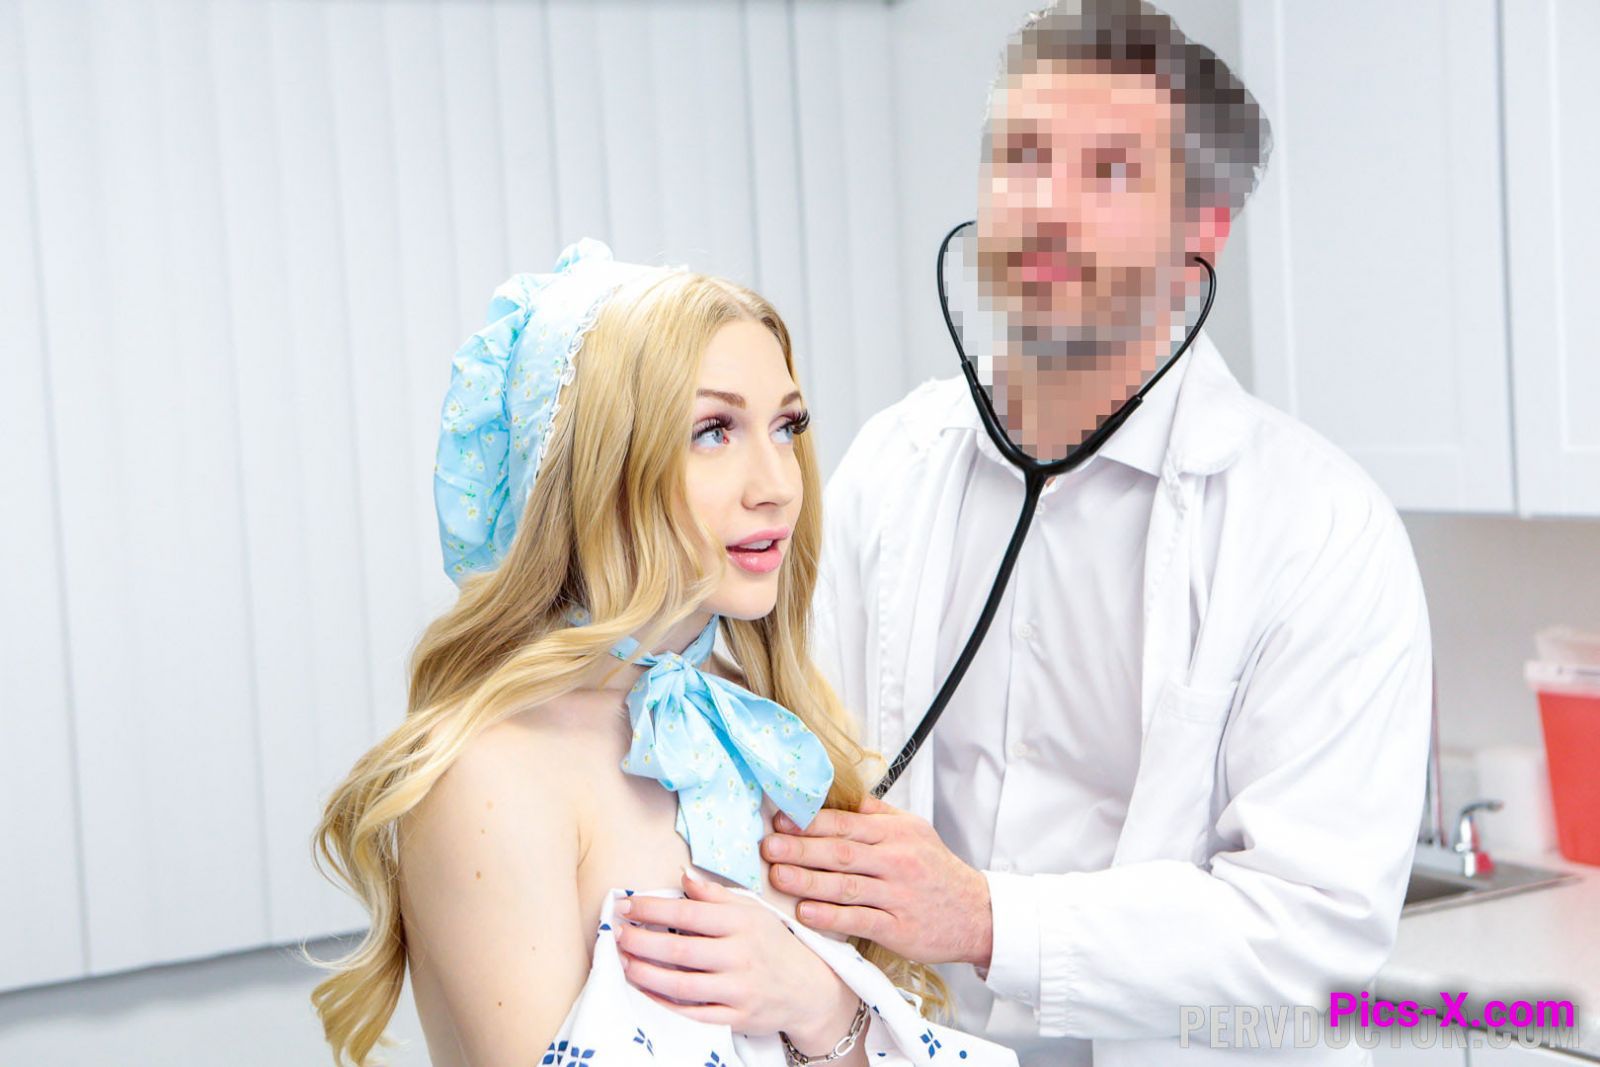 The Arrangement Part 2: Her First Medical Check - PervDoctor - Image 39